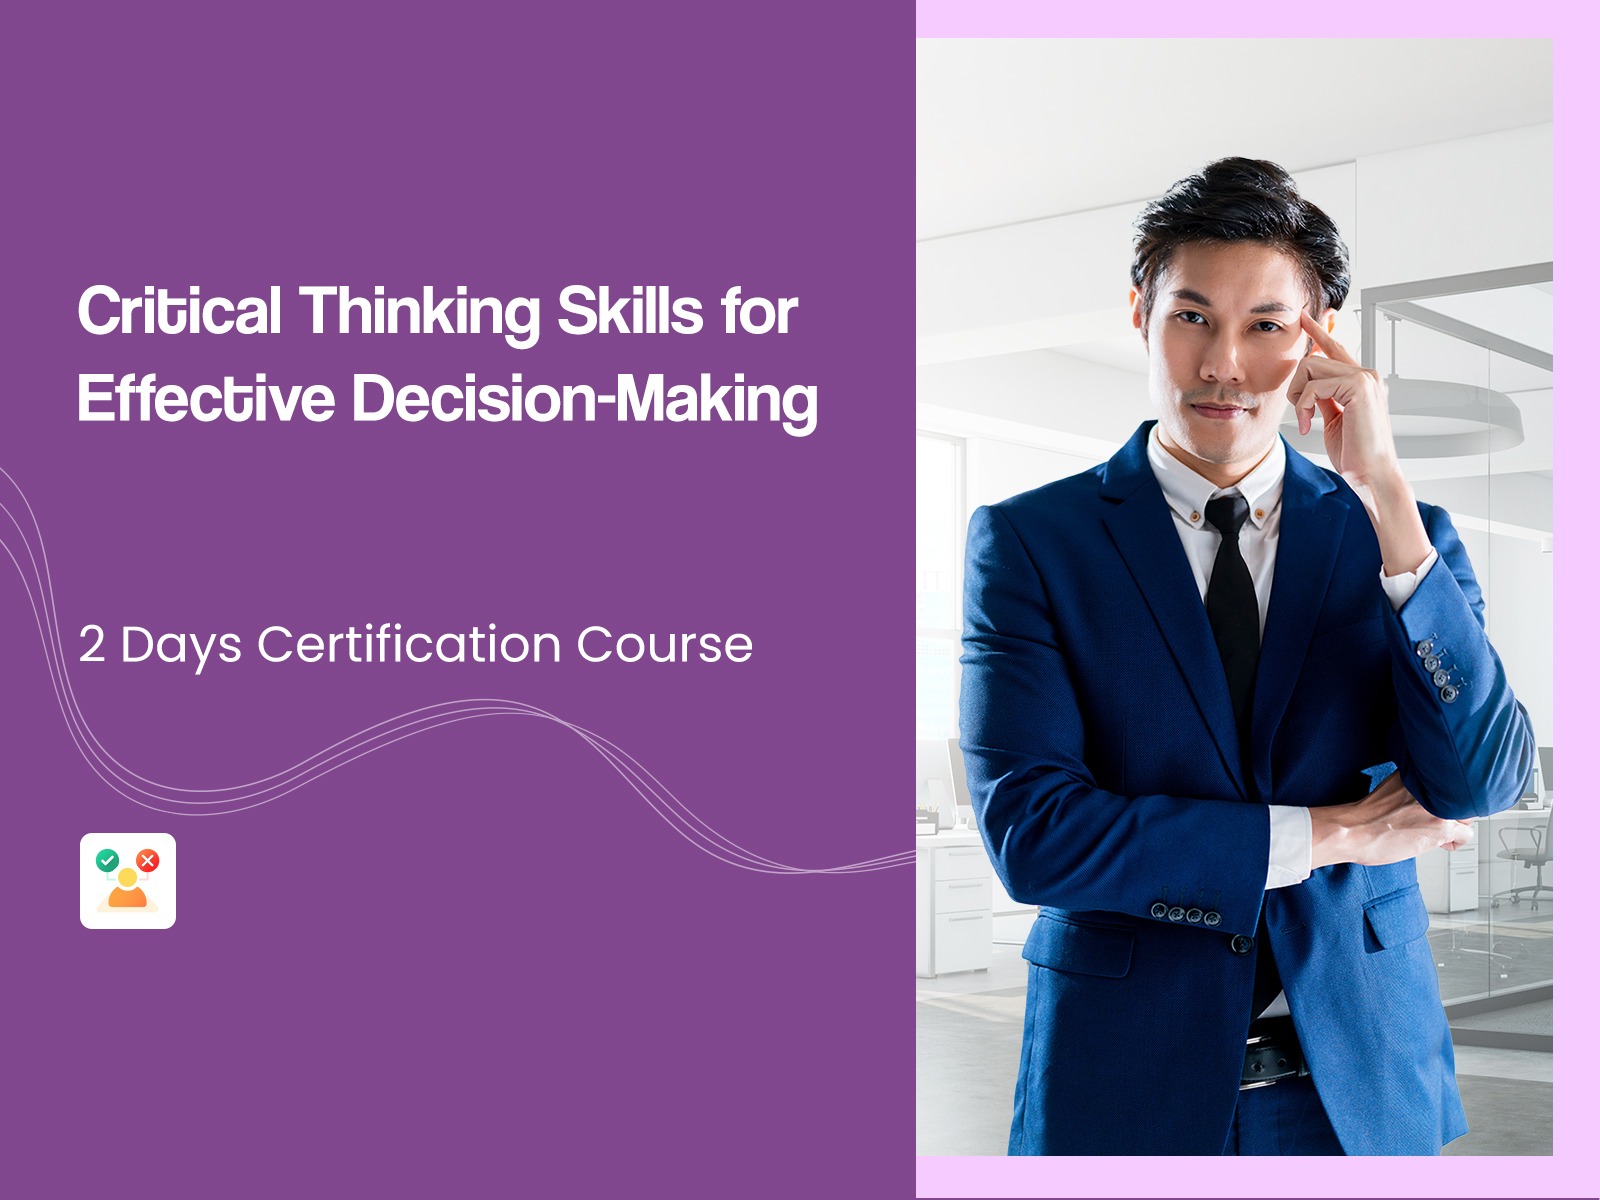 Critical Thinking Skills for Effective Decision-Making SkillsFuture course Singapore